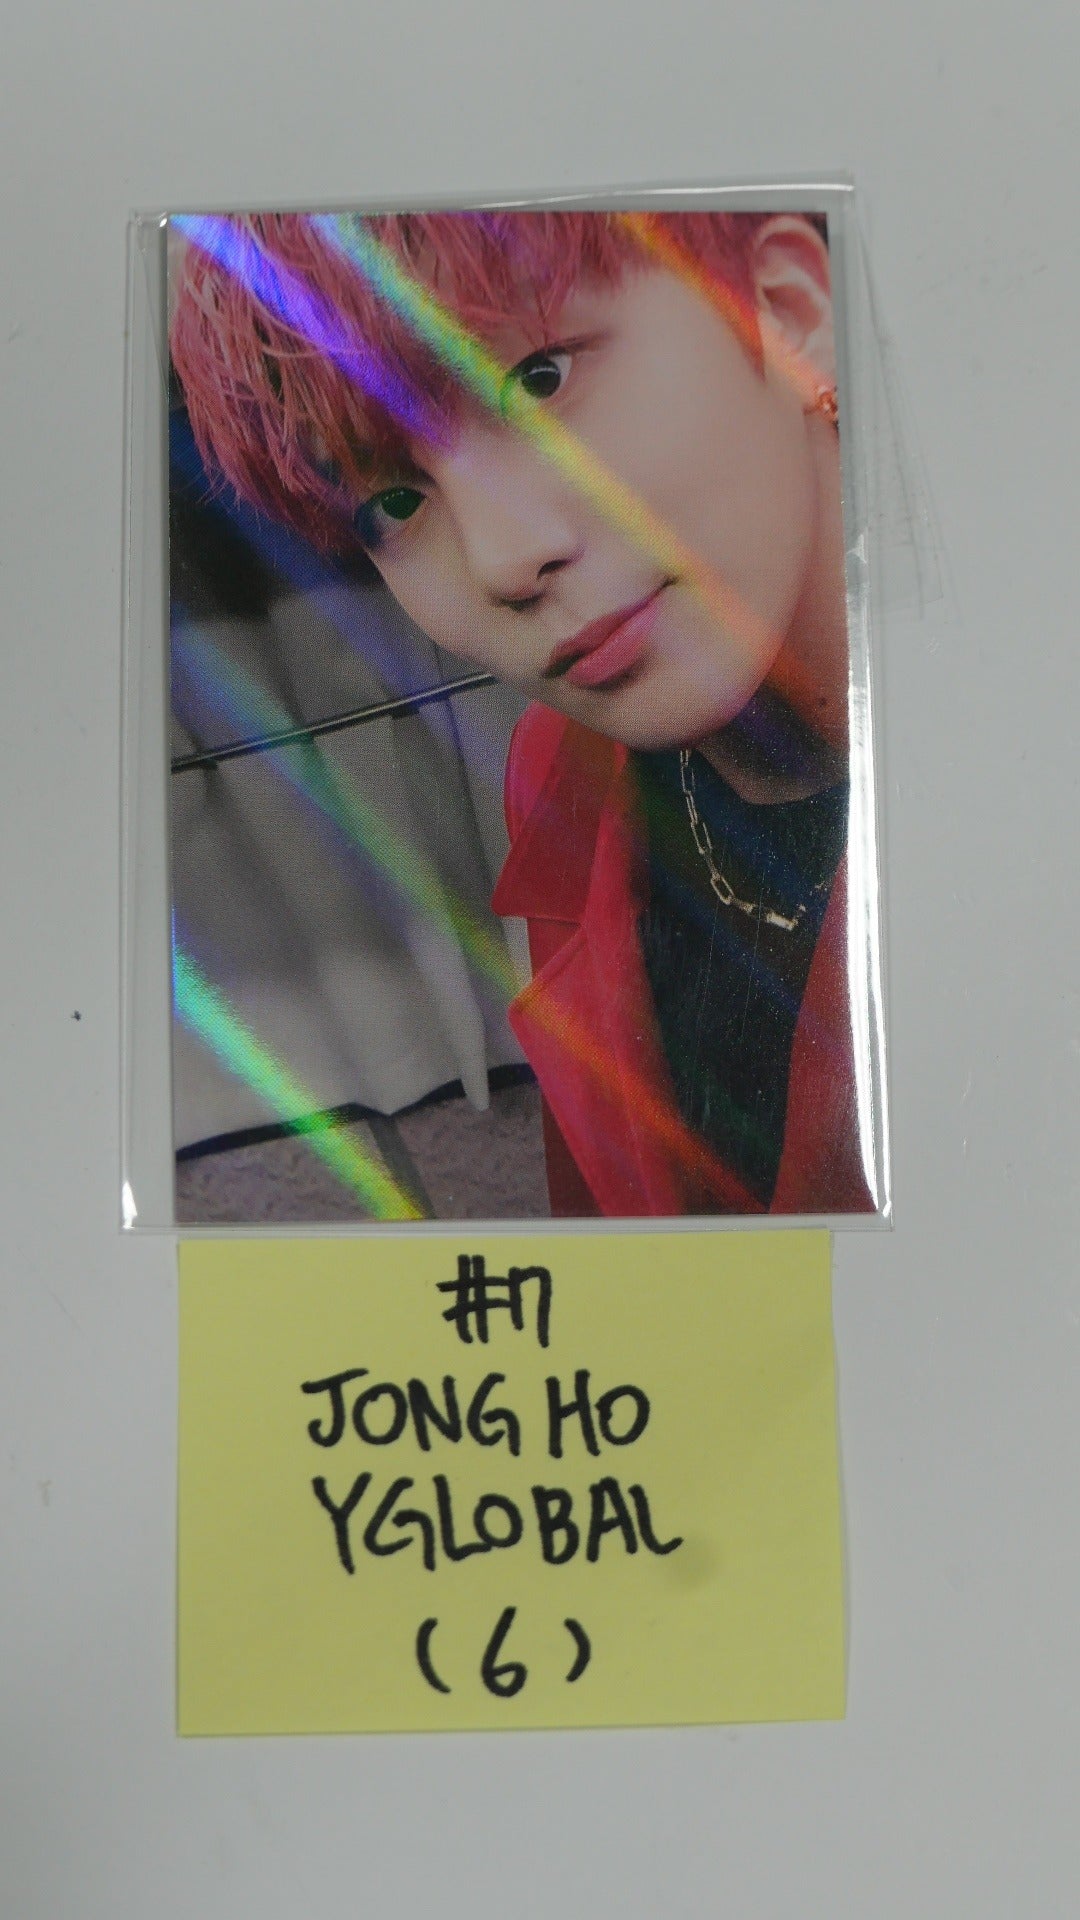 Ateez [ZERO:FEVER Part.2] - YGLOBAL Event Hologram Photocard